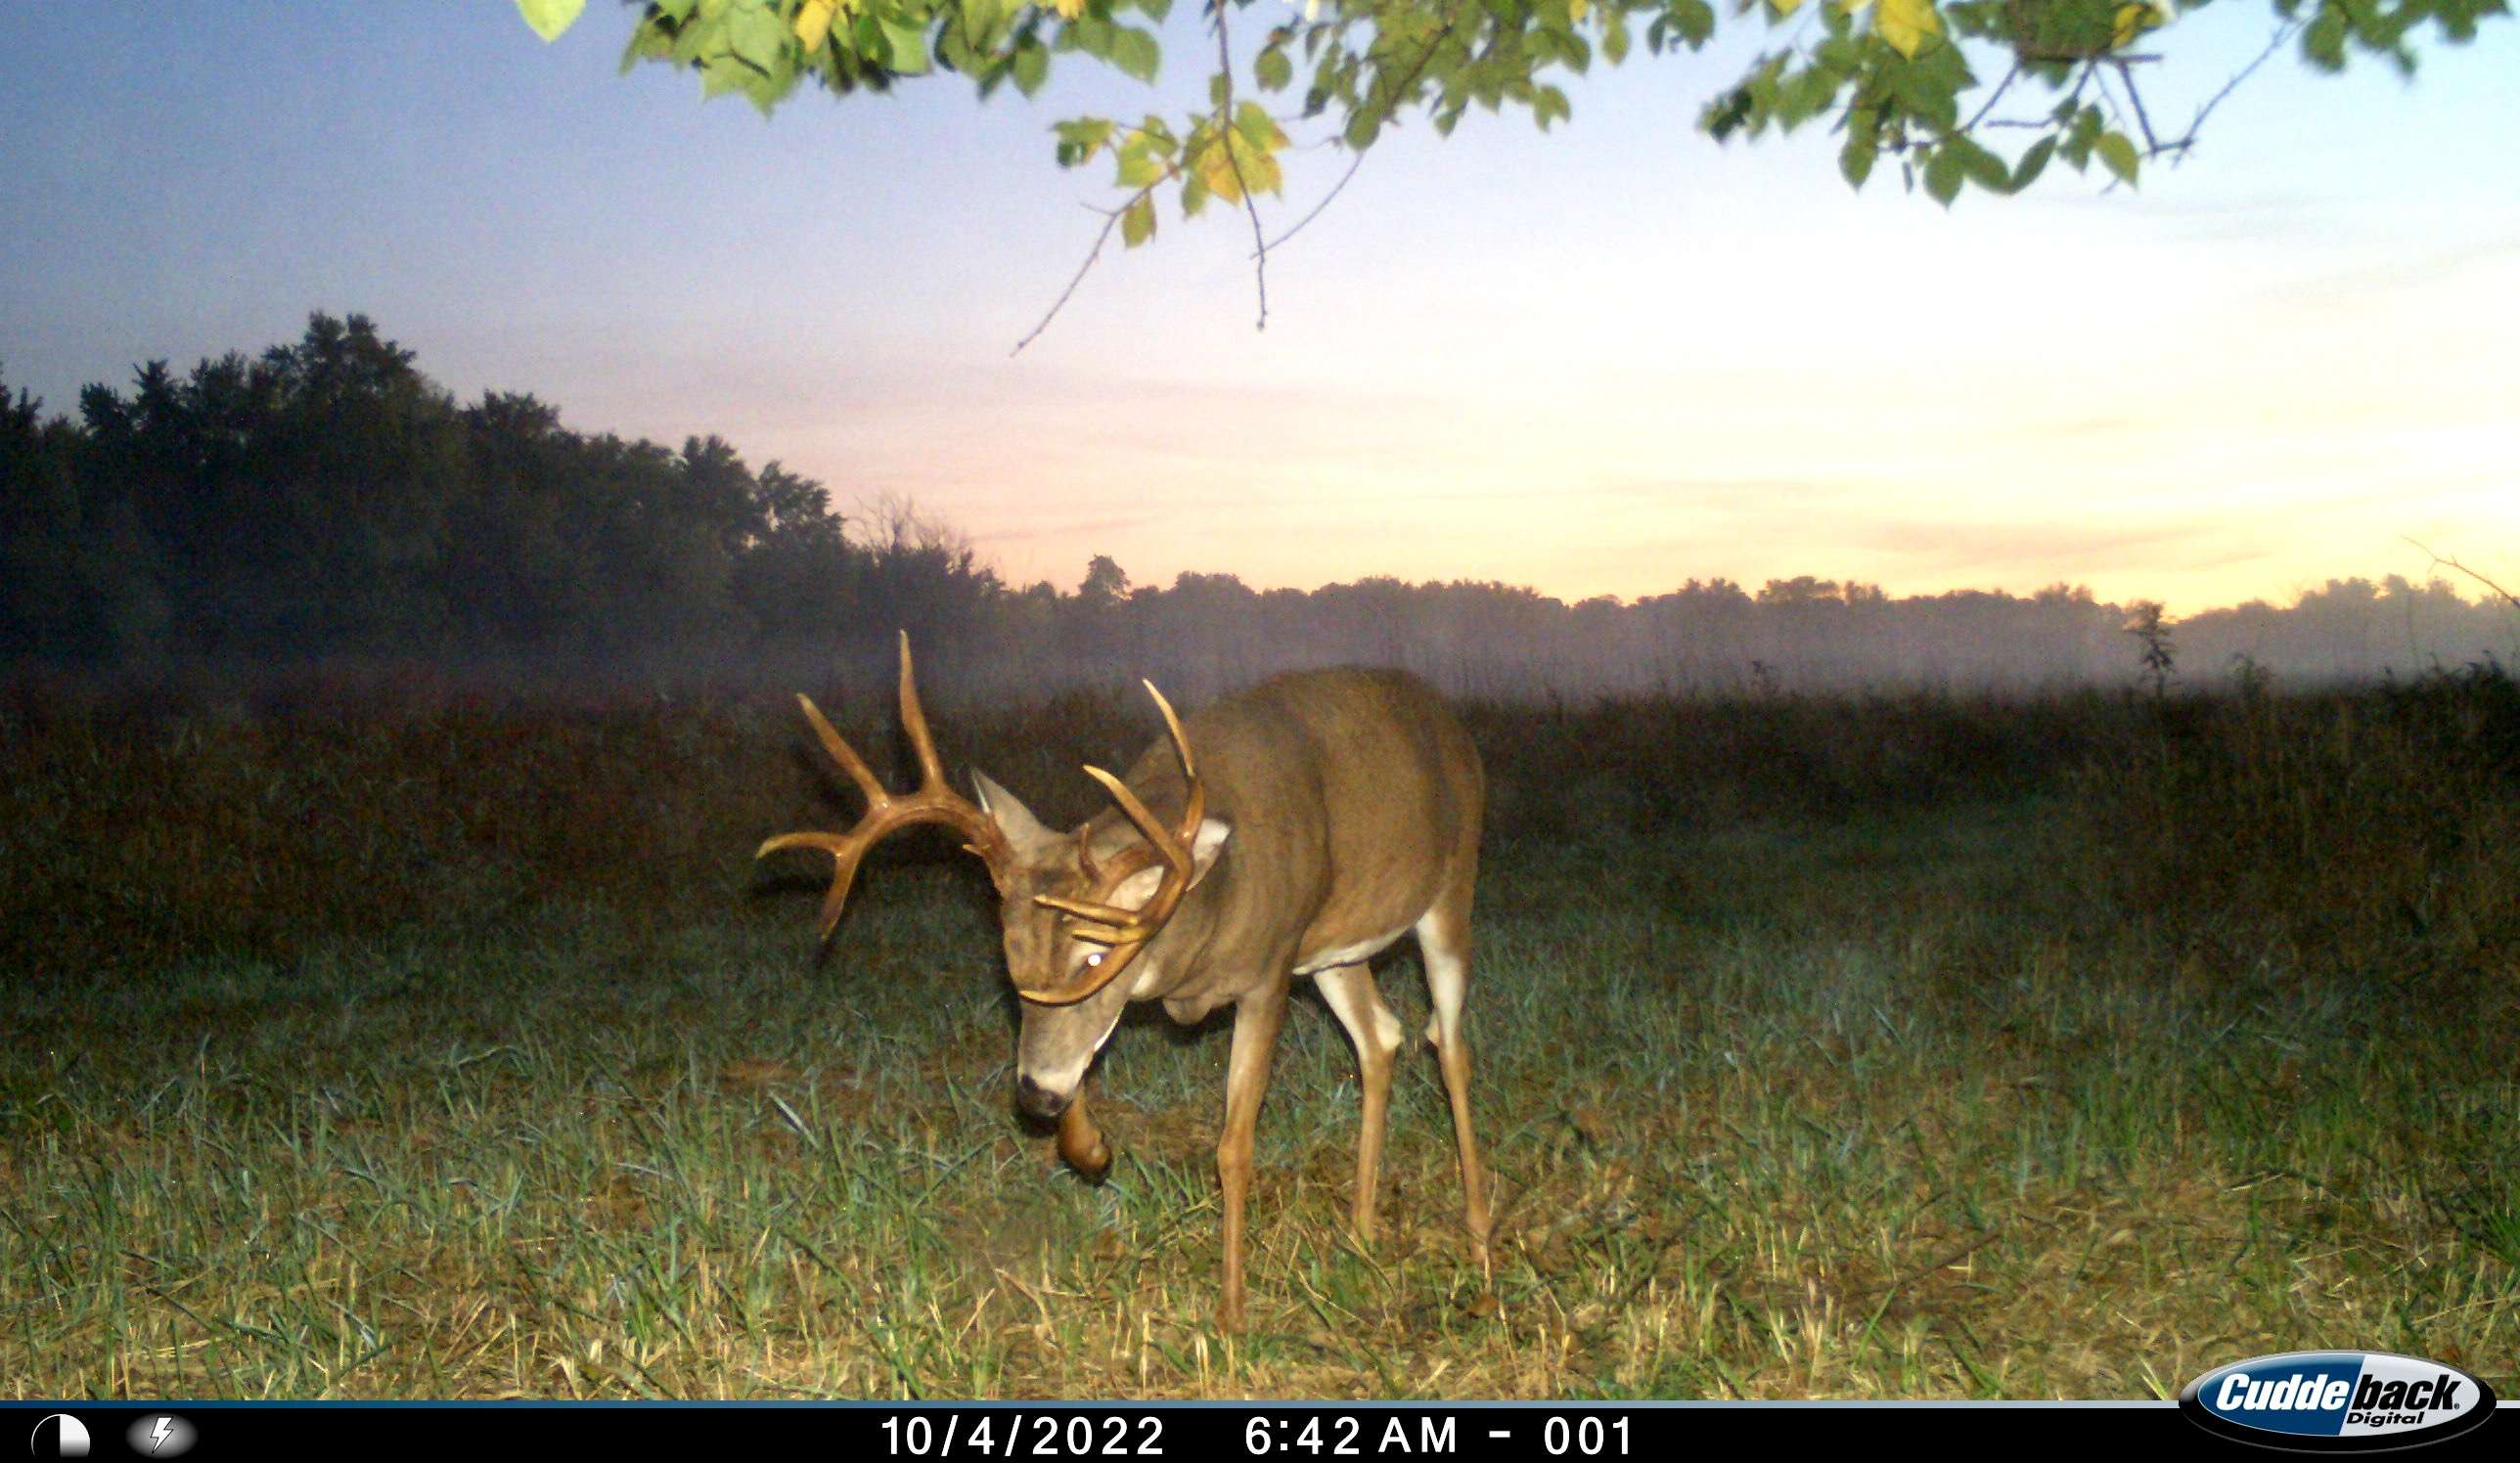 Reed knew about this deer, but didn't expect to see it when it stepped out. Image courtesy of Mike Reed